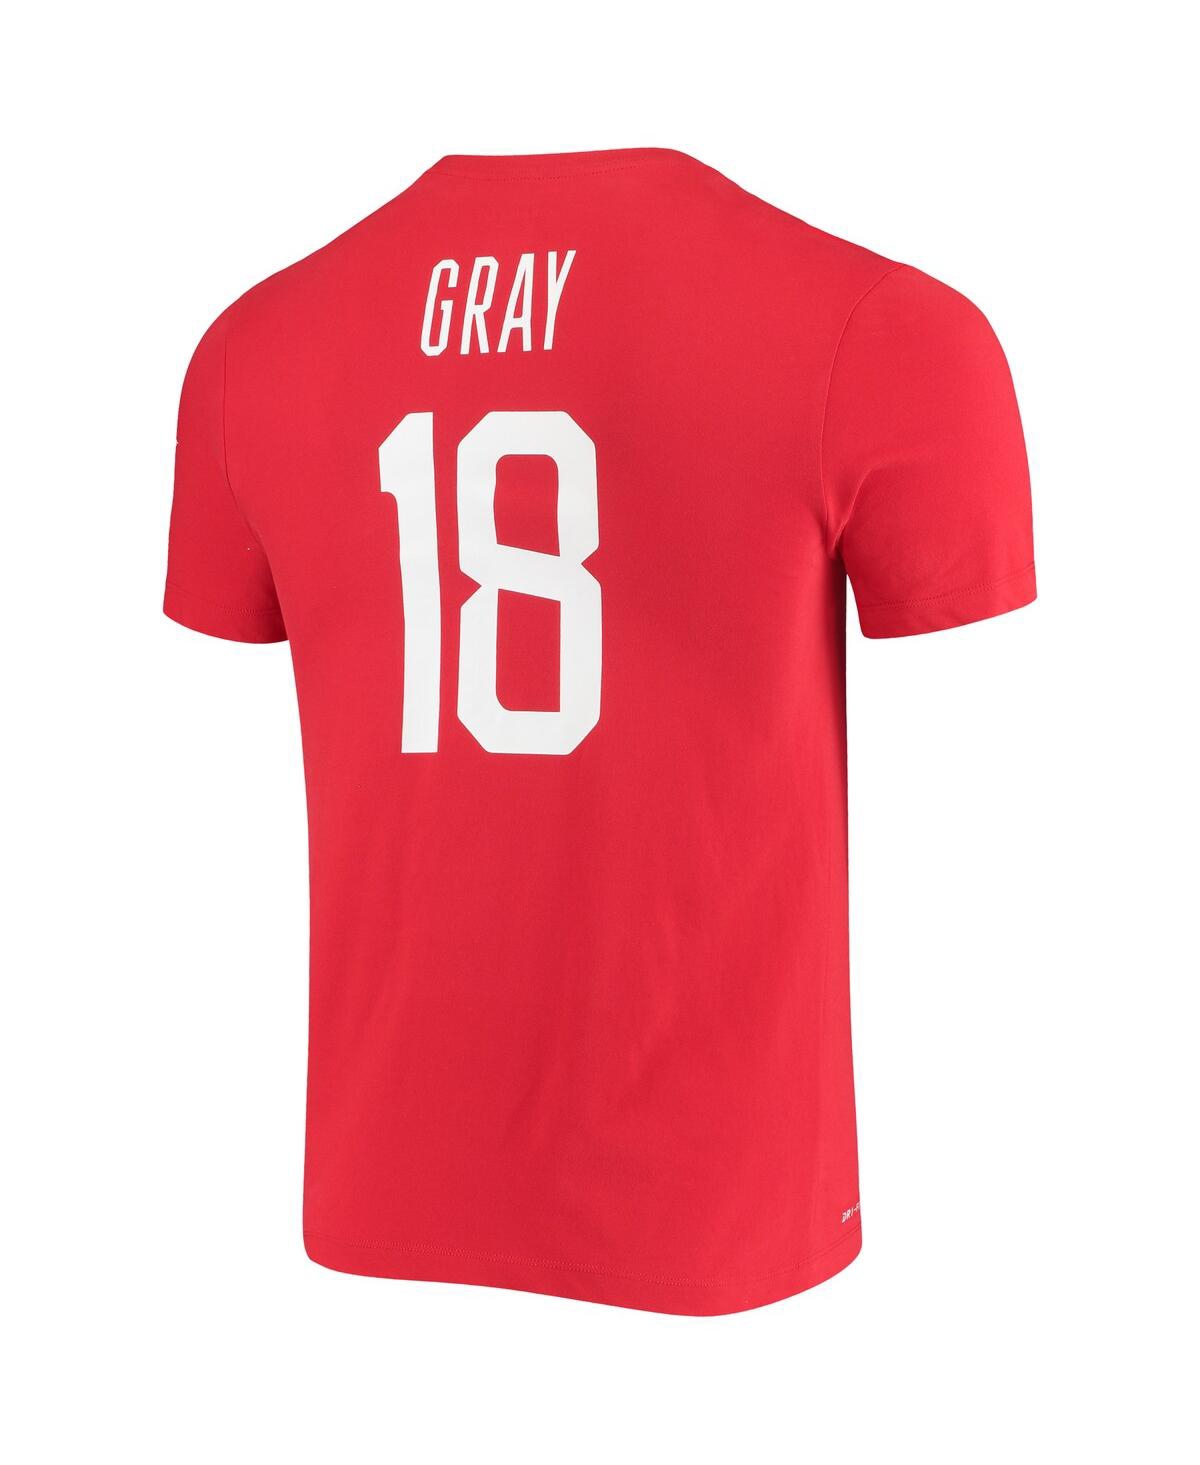 Shop Nike Women's  Chelsea Gray Usa Basketball Red Name And Number Performance T-shirt